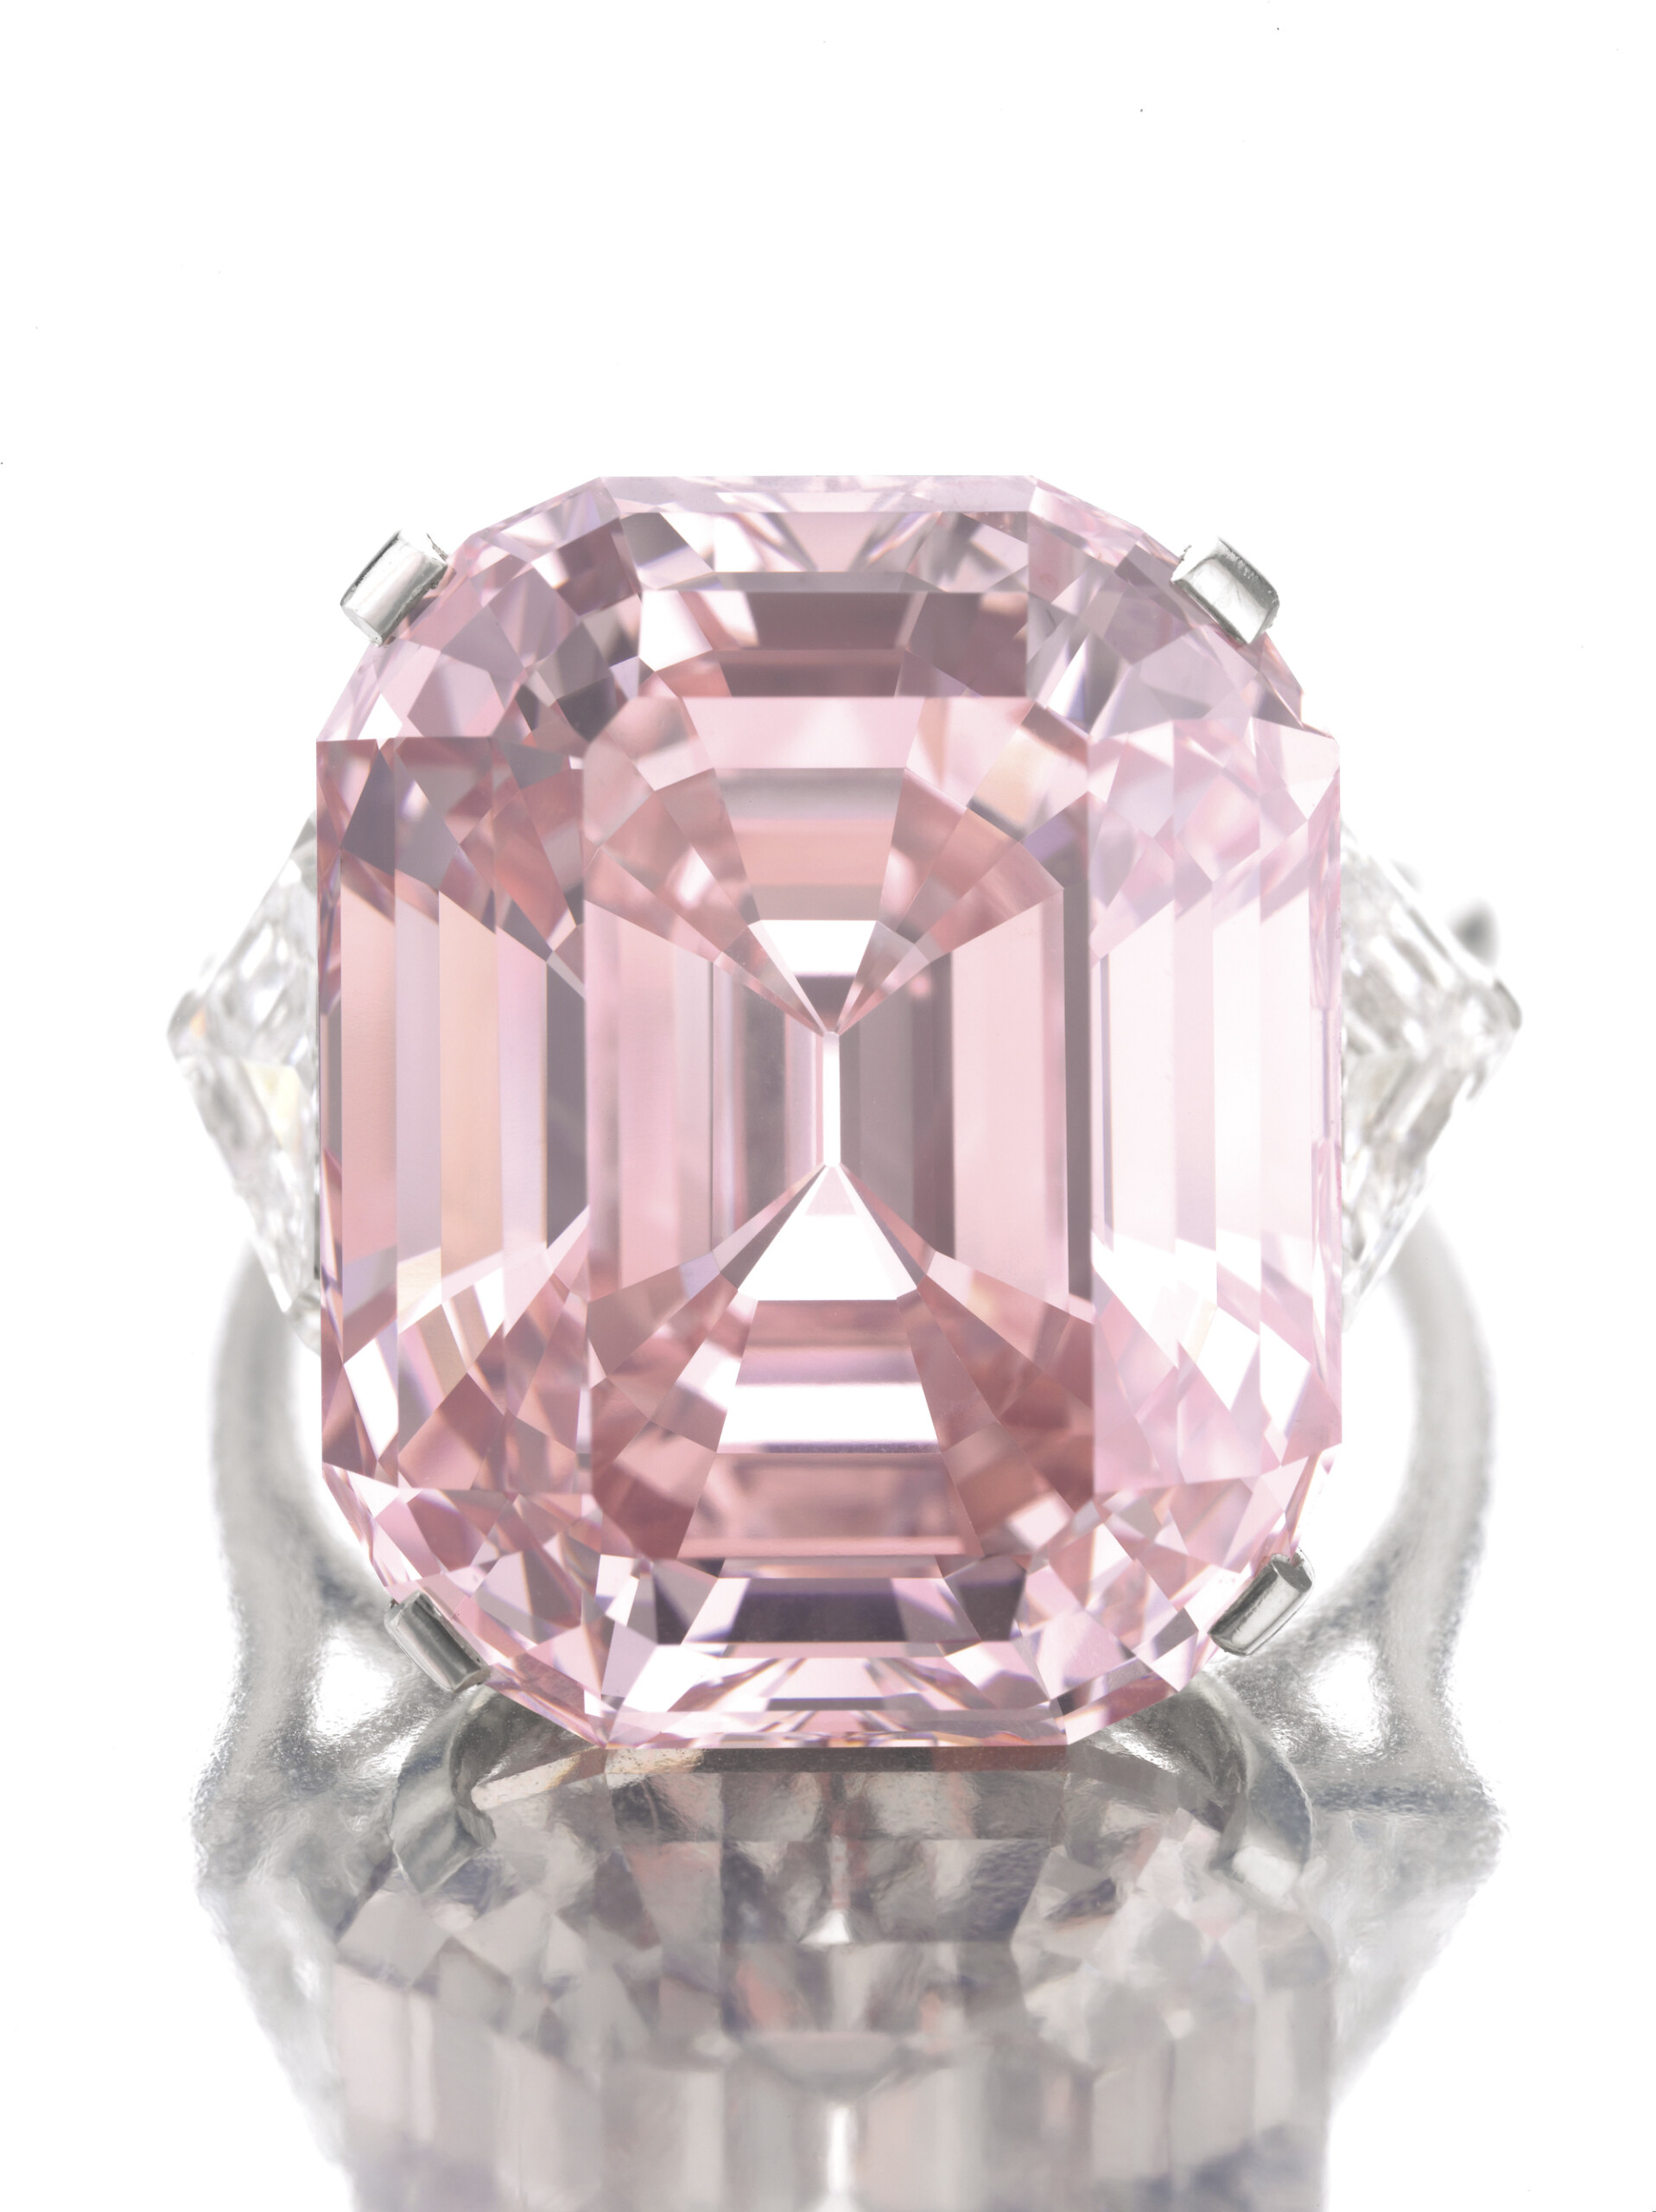 Pink Diamond Bought By Graff For Record 46 Million In Geneva